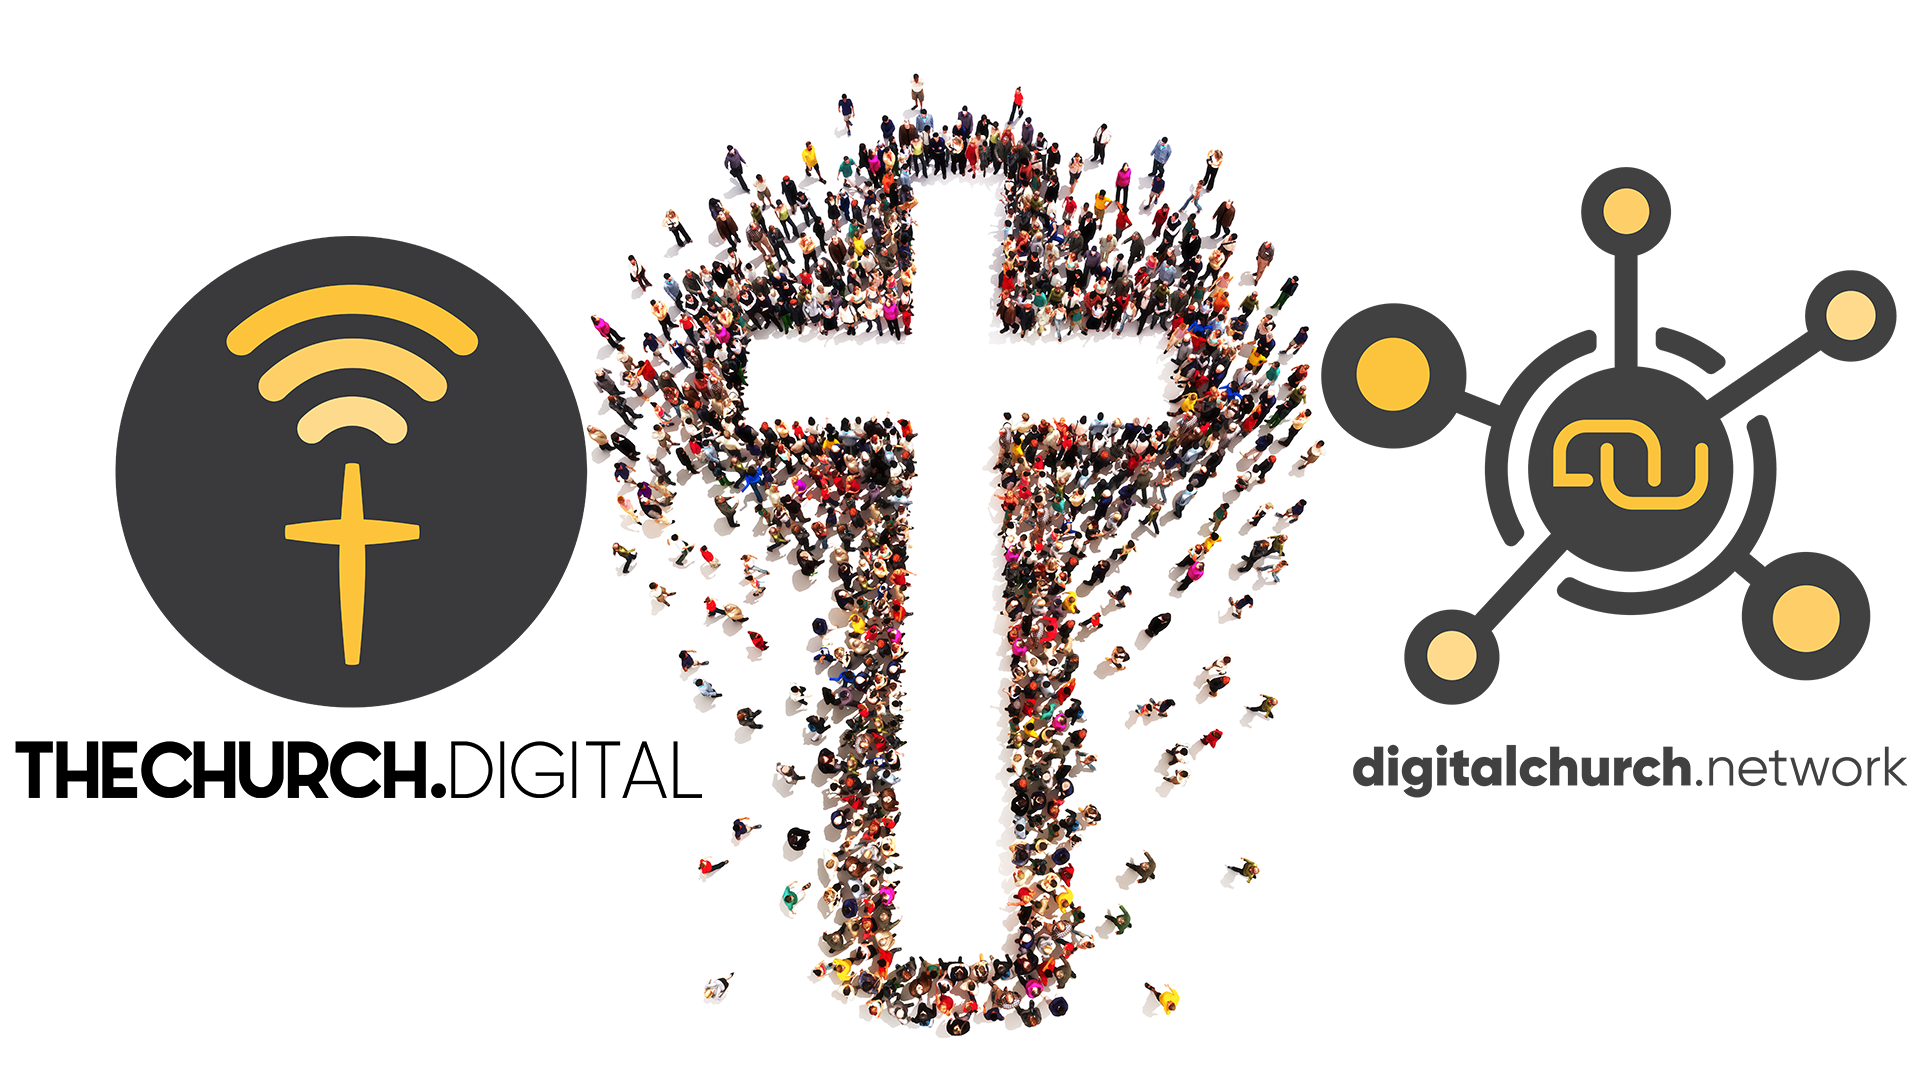 digital churches are awesome